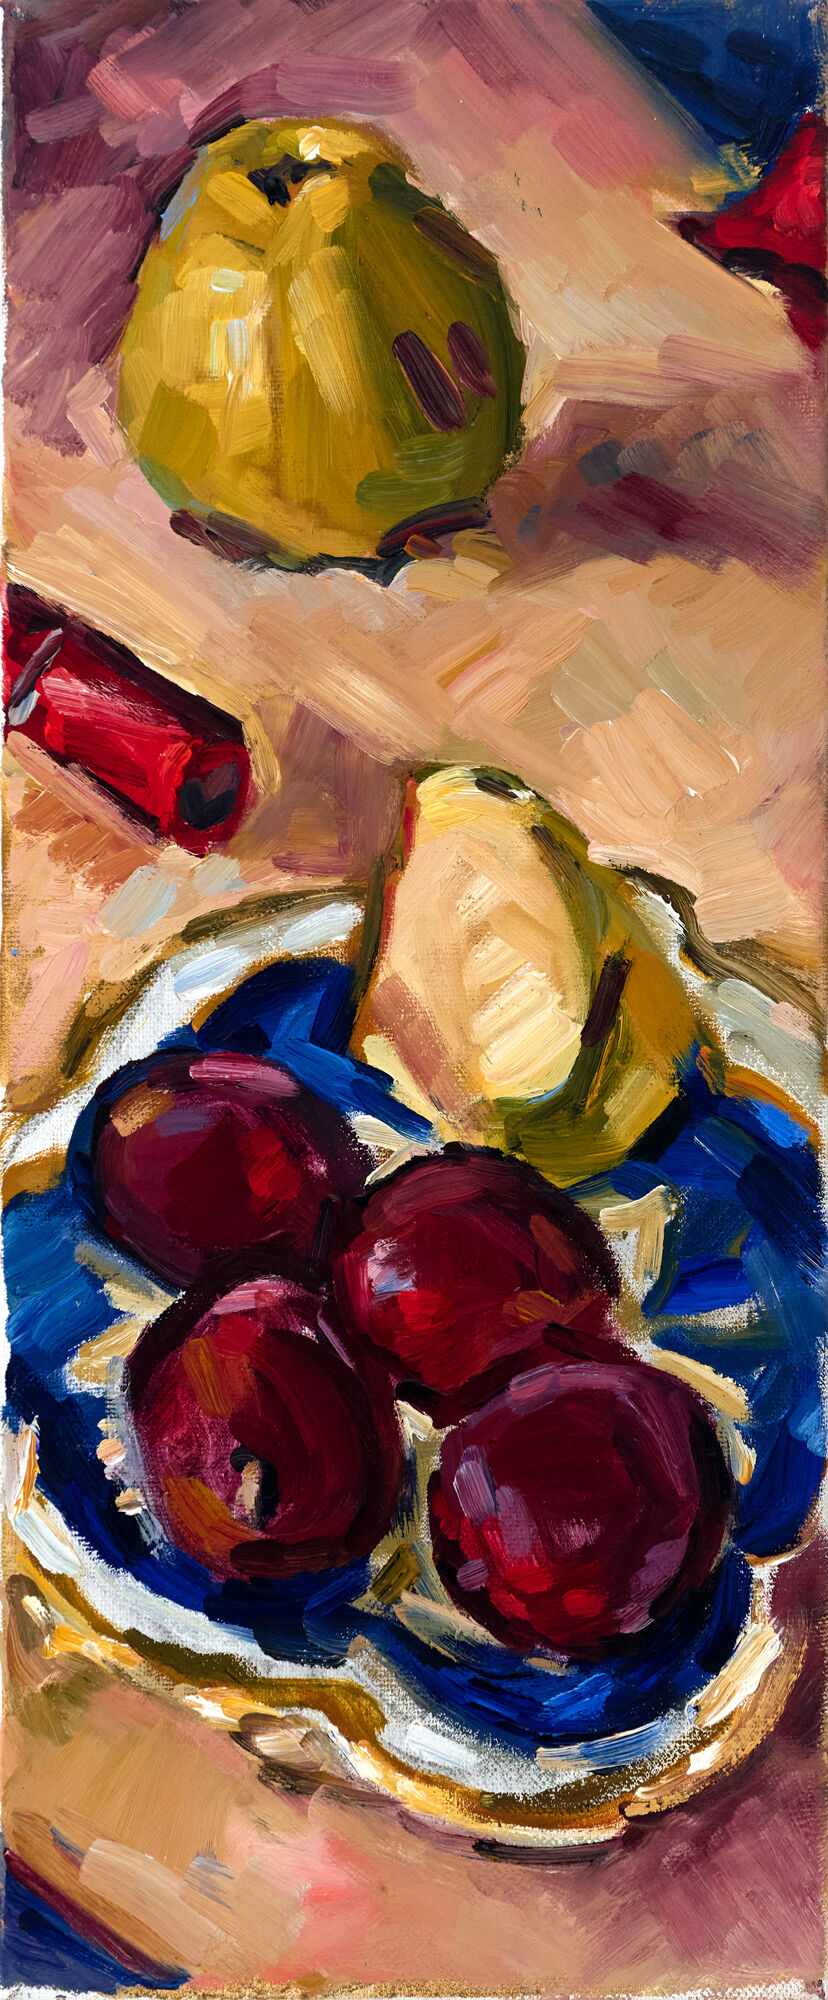 Picture "Still Life with Apple and Plum" (2011) (Unique piece) by Bettina Moras